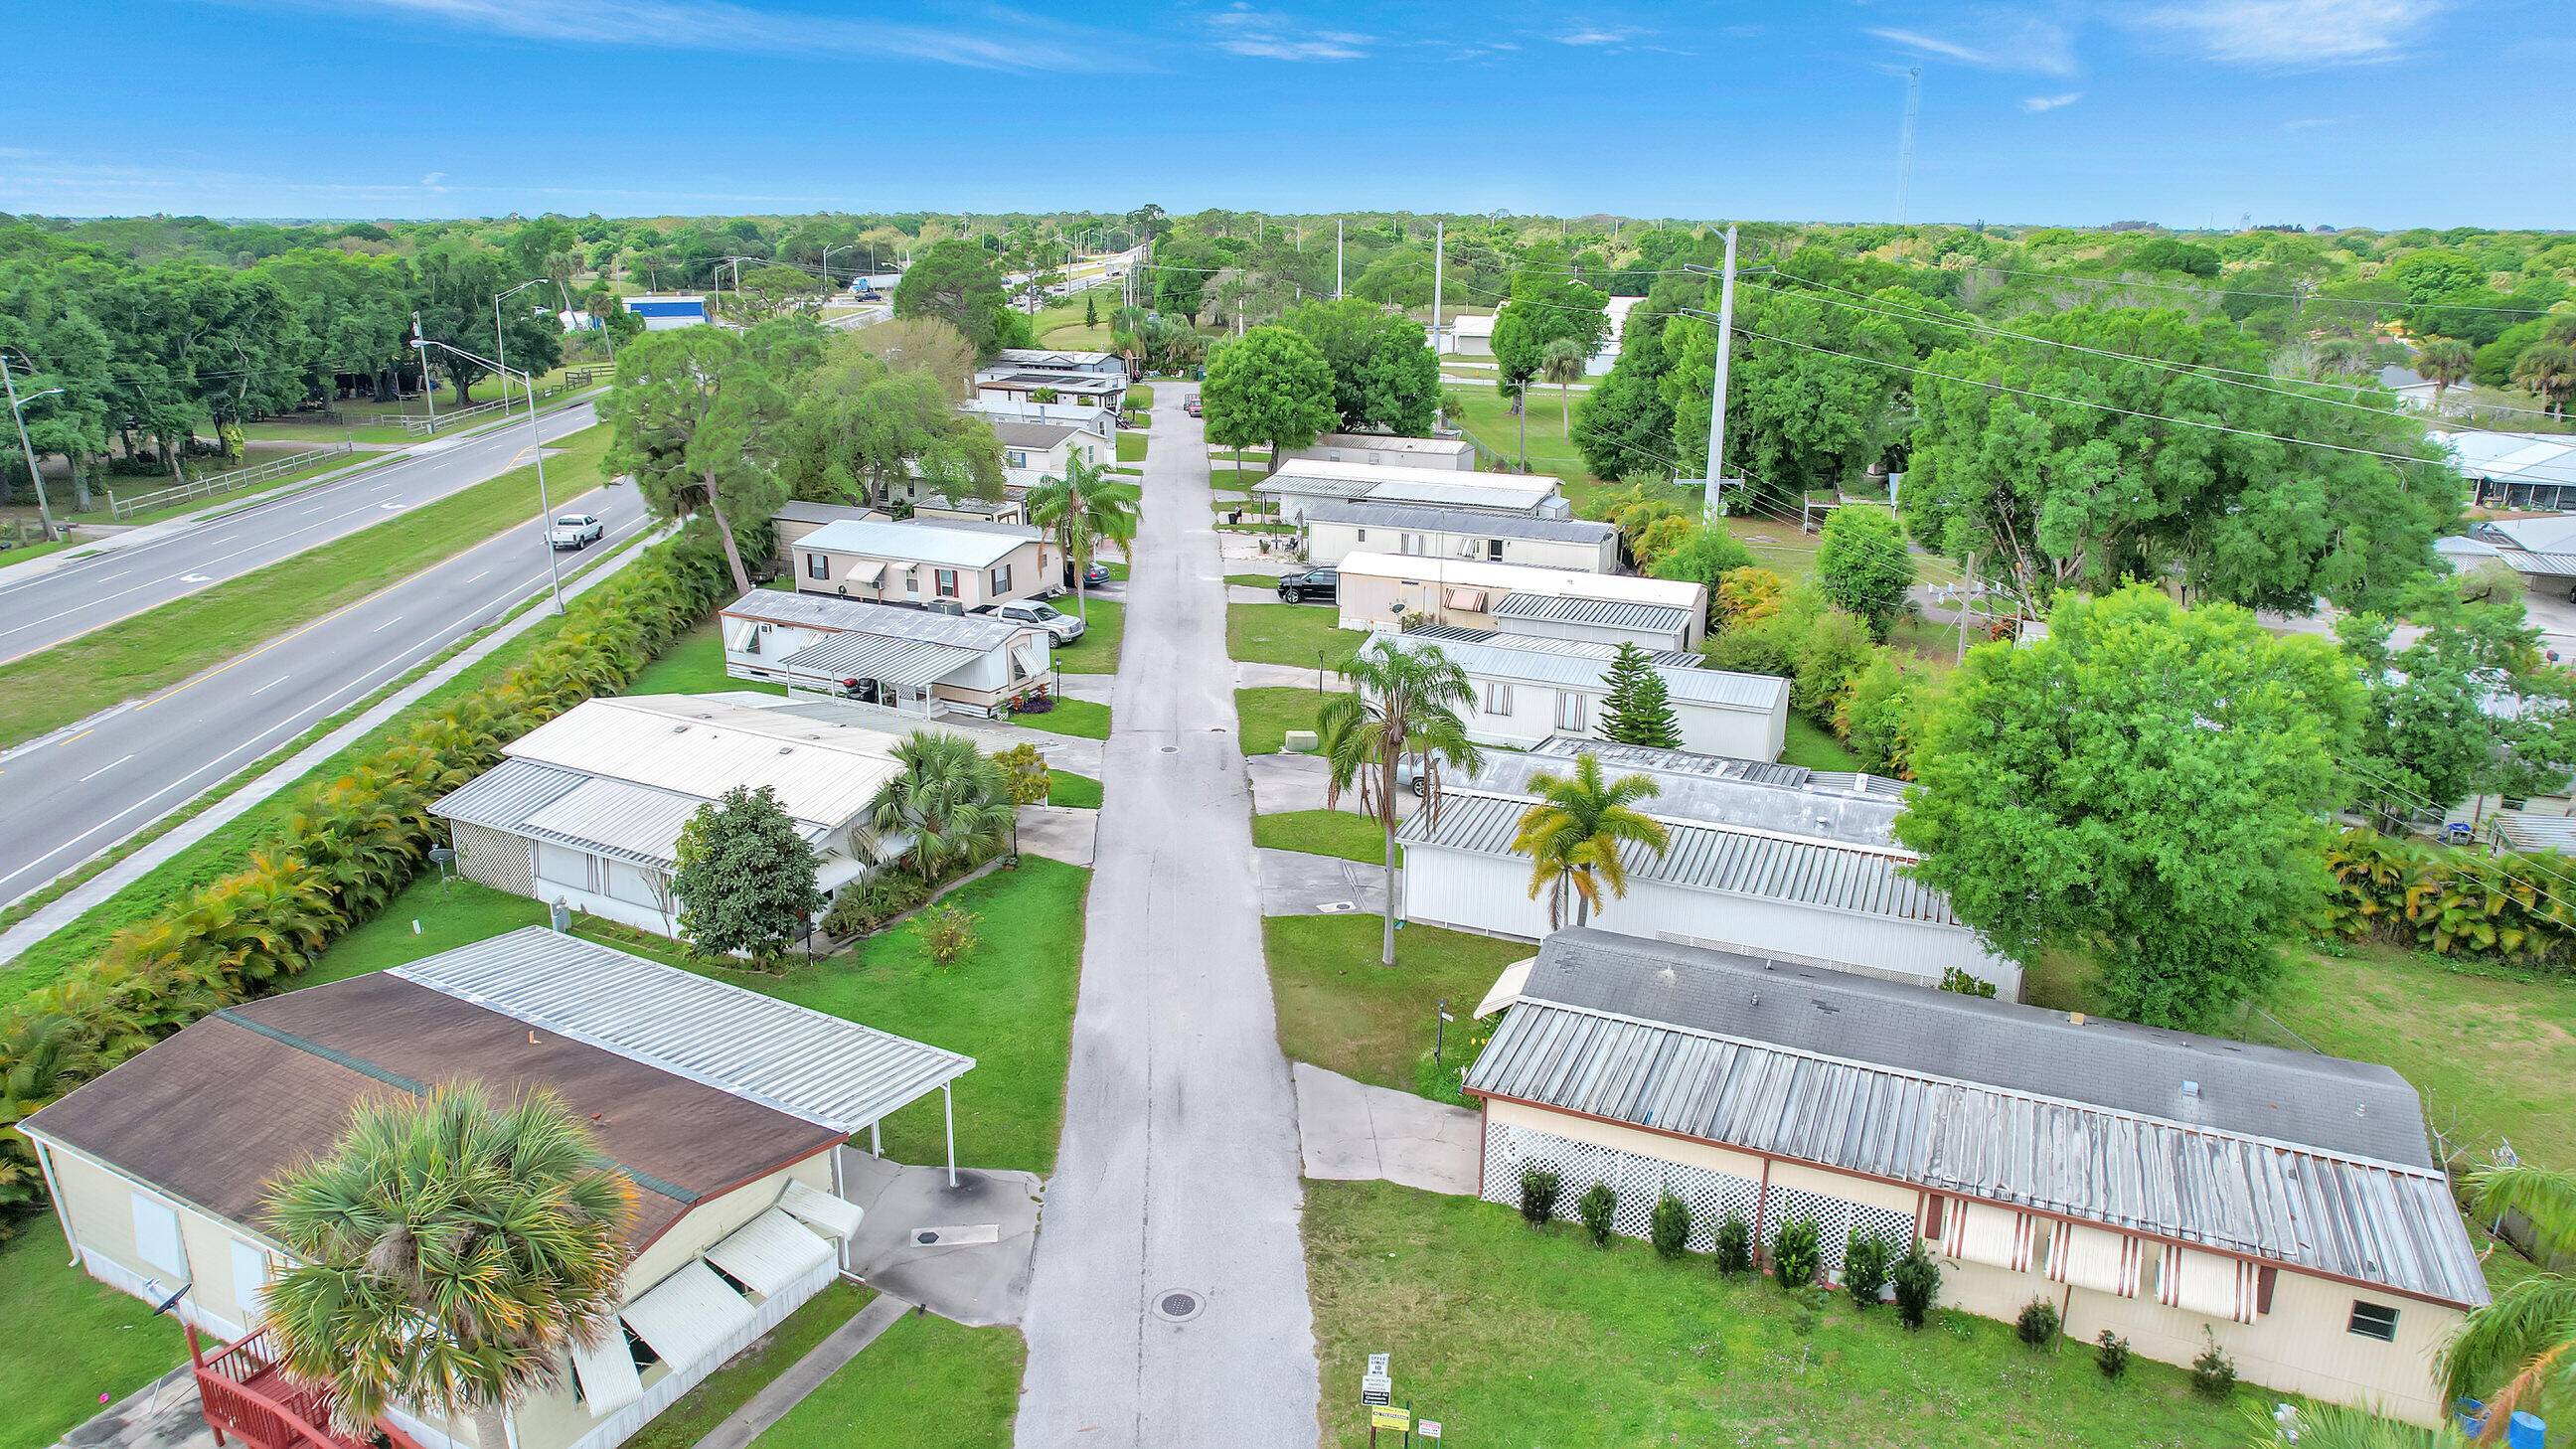 This is a thriving community nestled in the heart of Okeechobee, Florida.